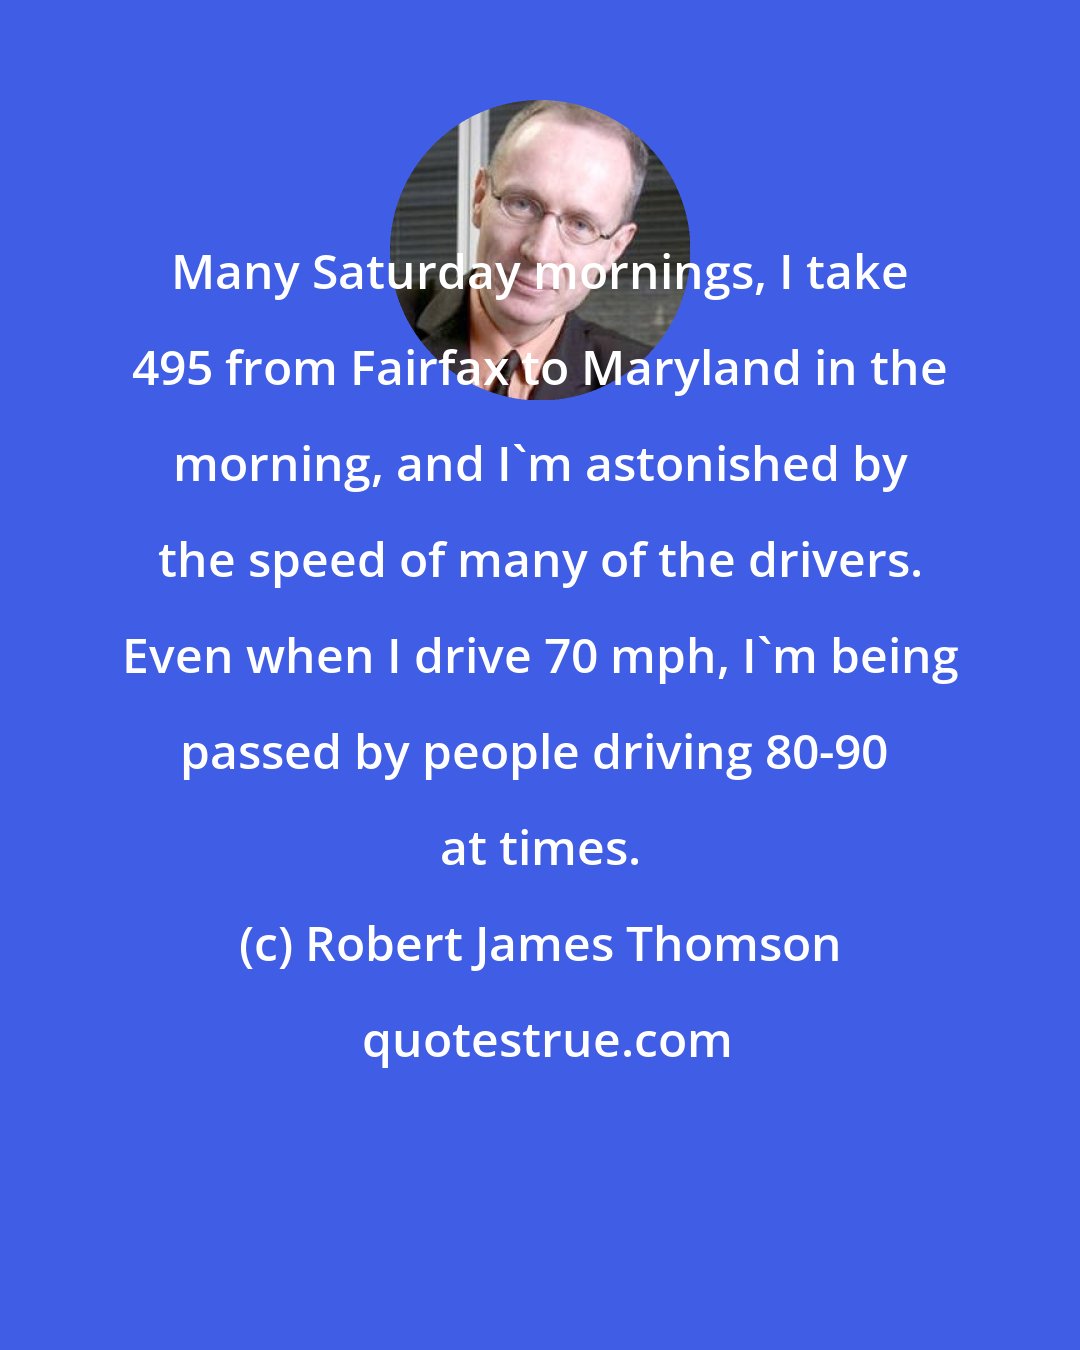 Robert James Thomson: Many Saturday mornings, I take 495 from Fairfax to Maryland in the morning, and I'm astonished by the speed of many of the drivers. Even when I drive 70 mph, I'm being passed by people driving 80-90+ at times.